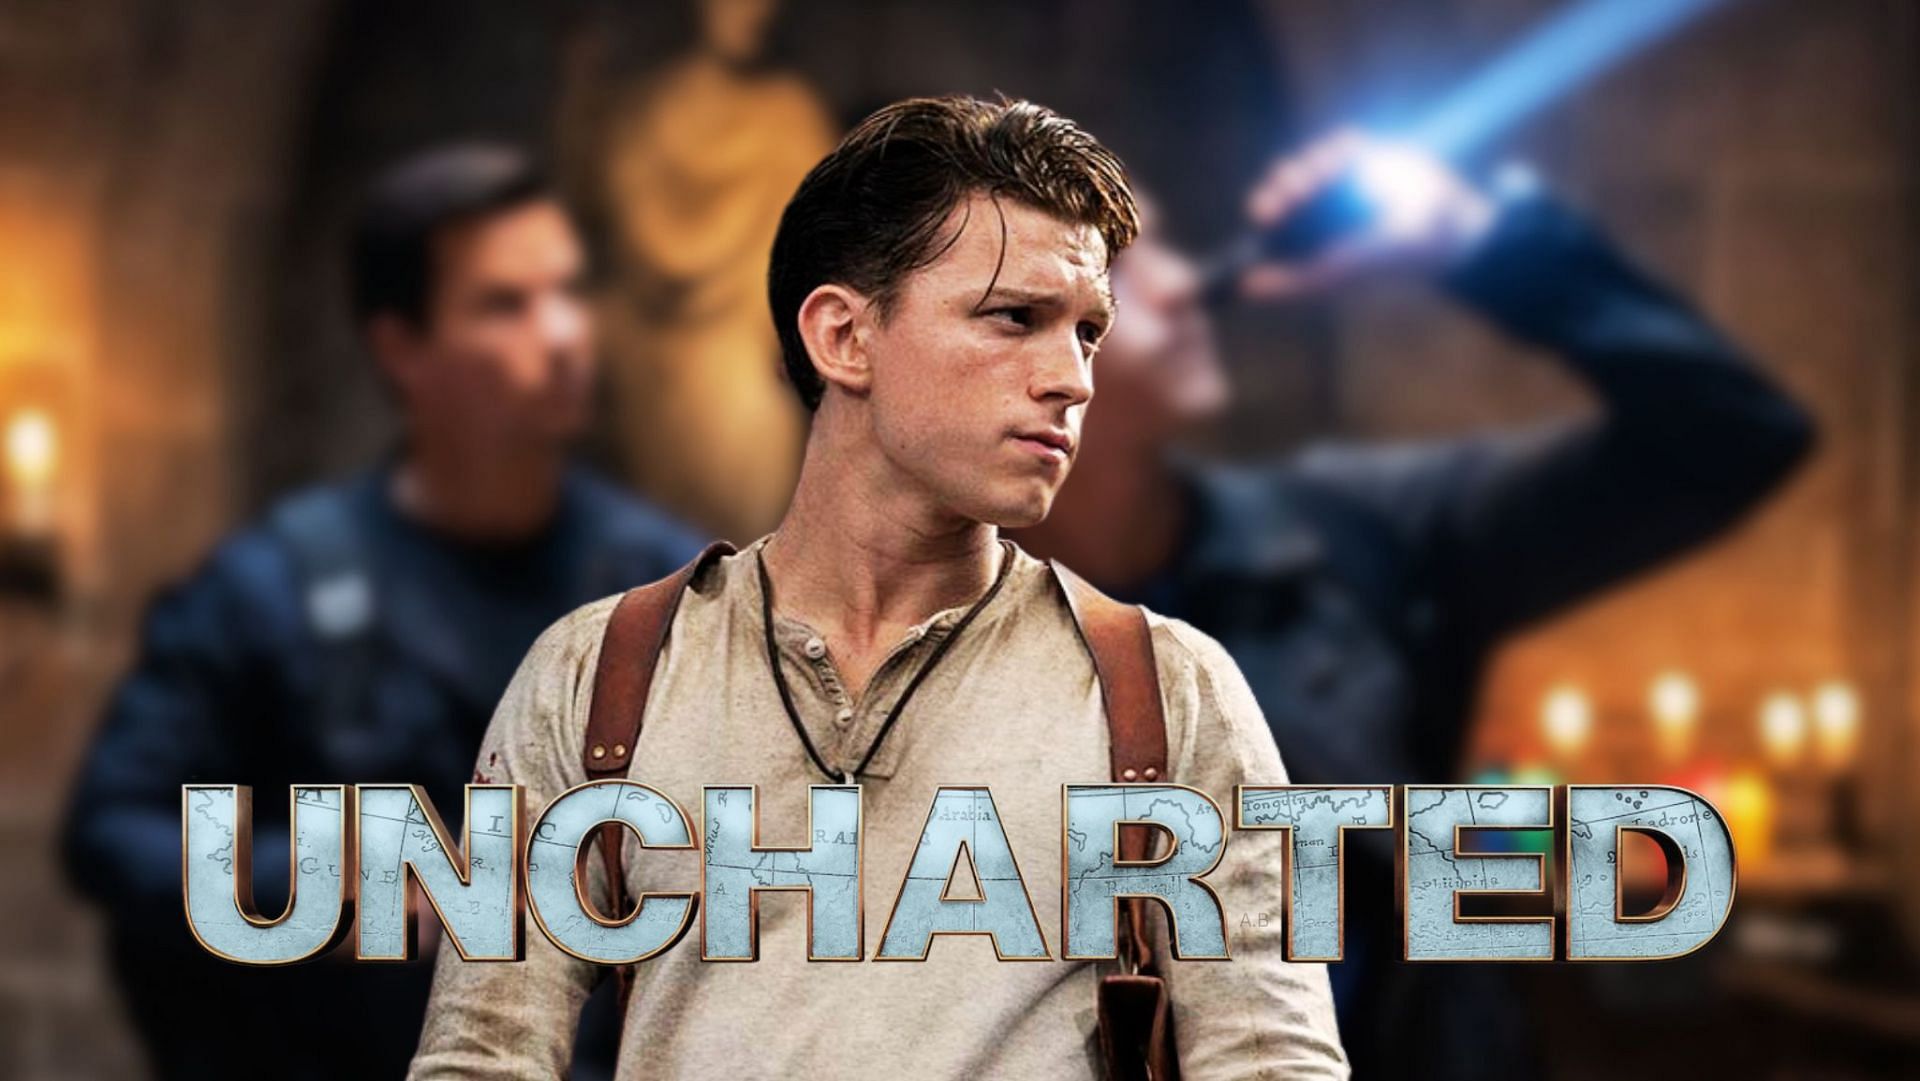 Uncharted' Trailer 2 Confirms Rudy Pankow Will Appear in the Movie